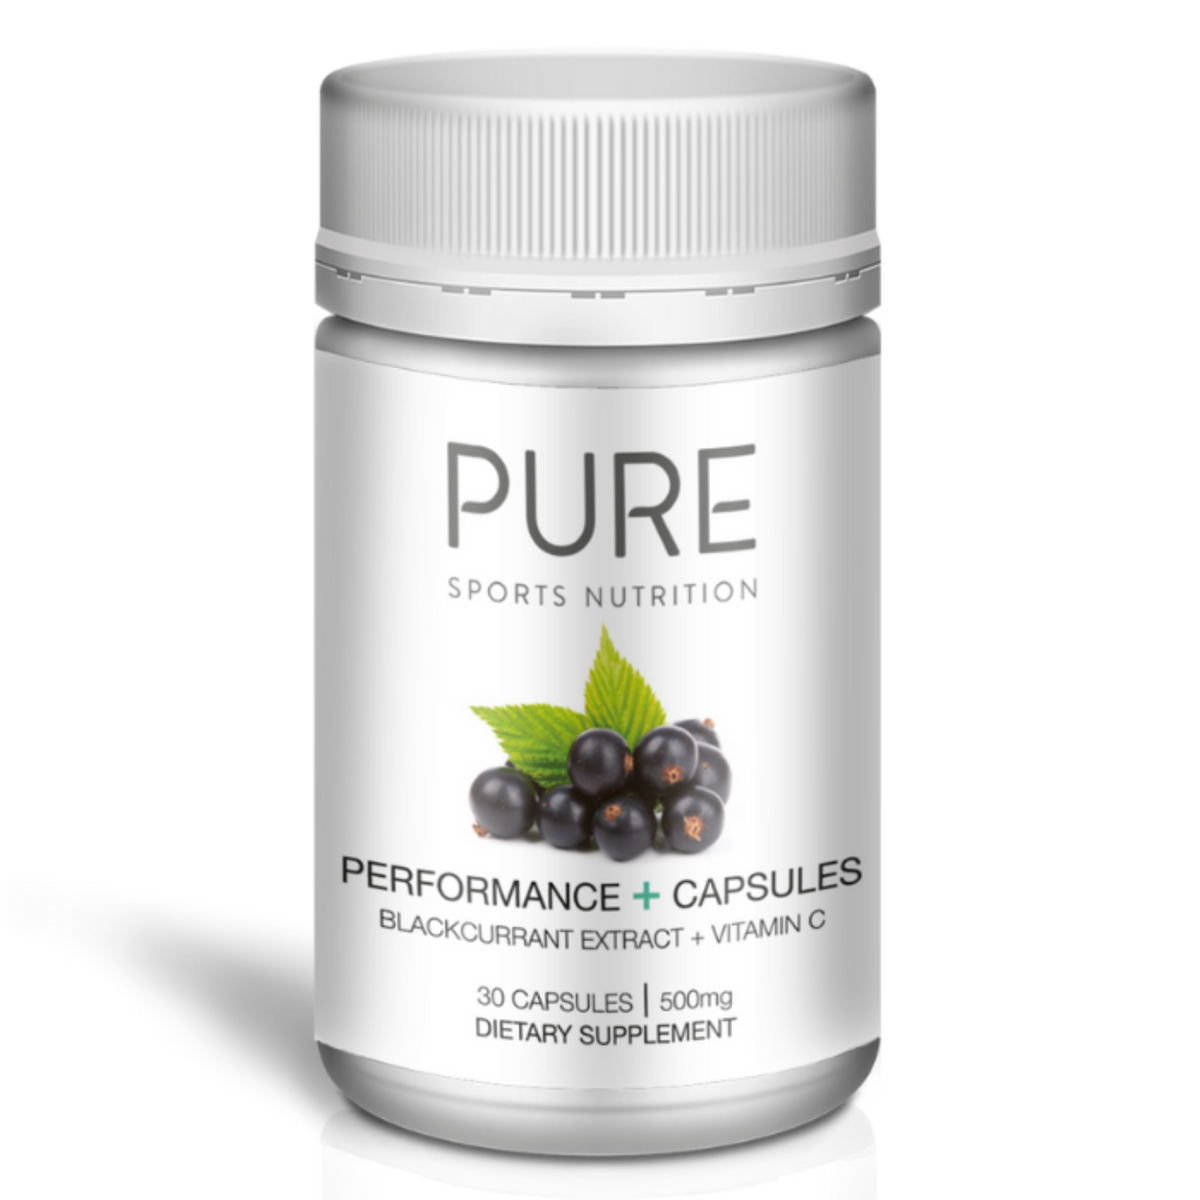 Pure Sports Nutrition Performance + Capsules in blackcurrant extract